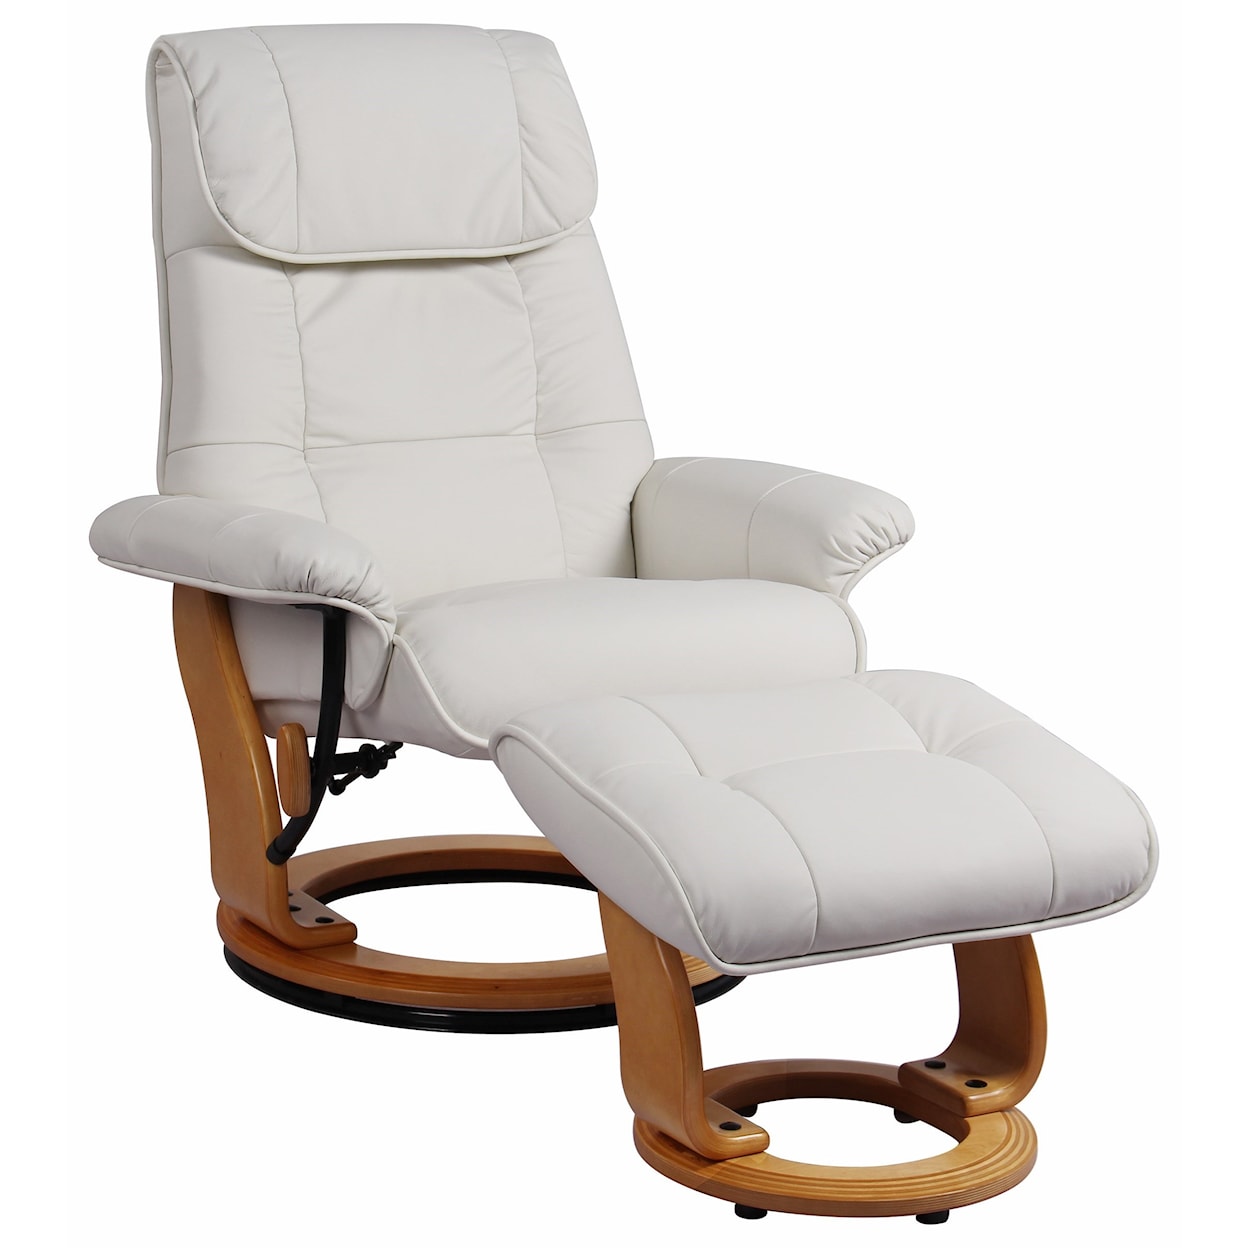 Benchmaster Ventura Reclining Chair and Ottoman w/ Light Wood